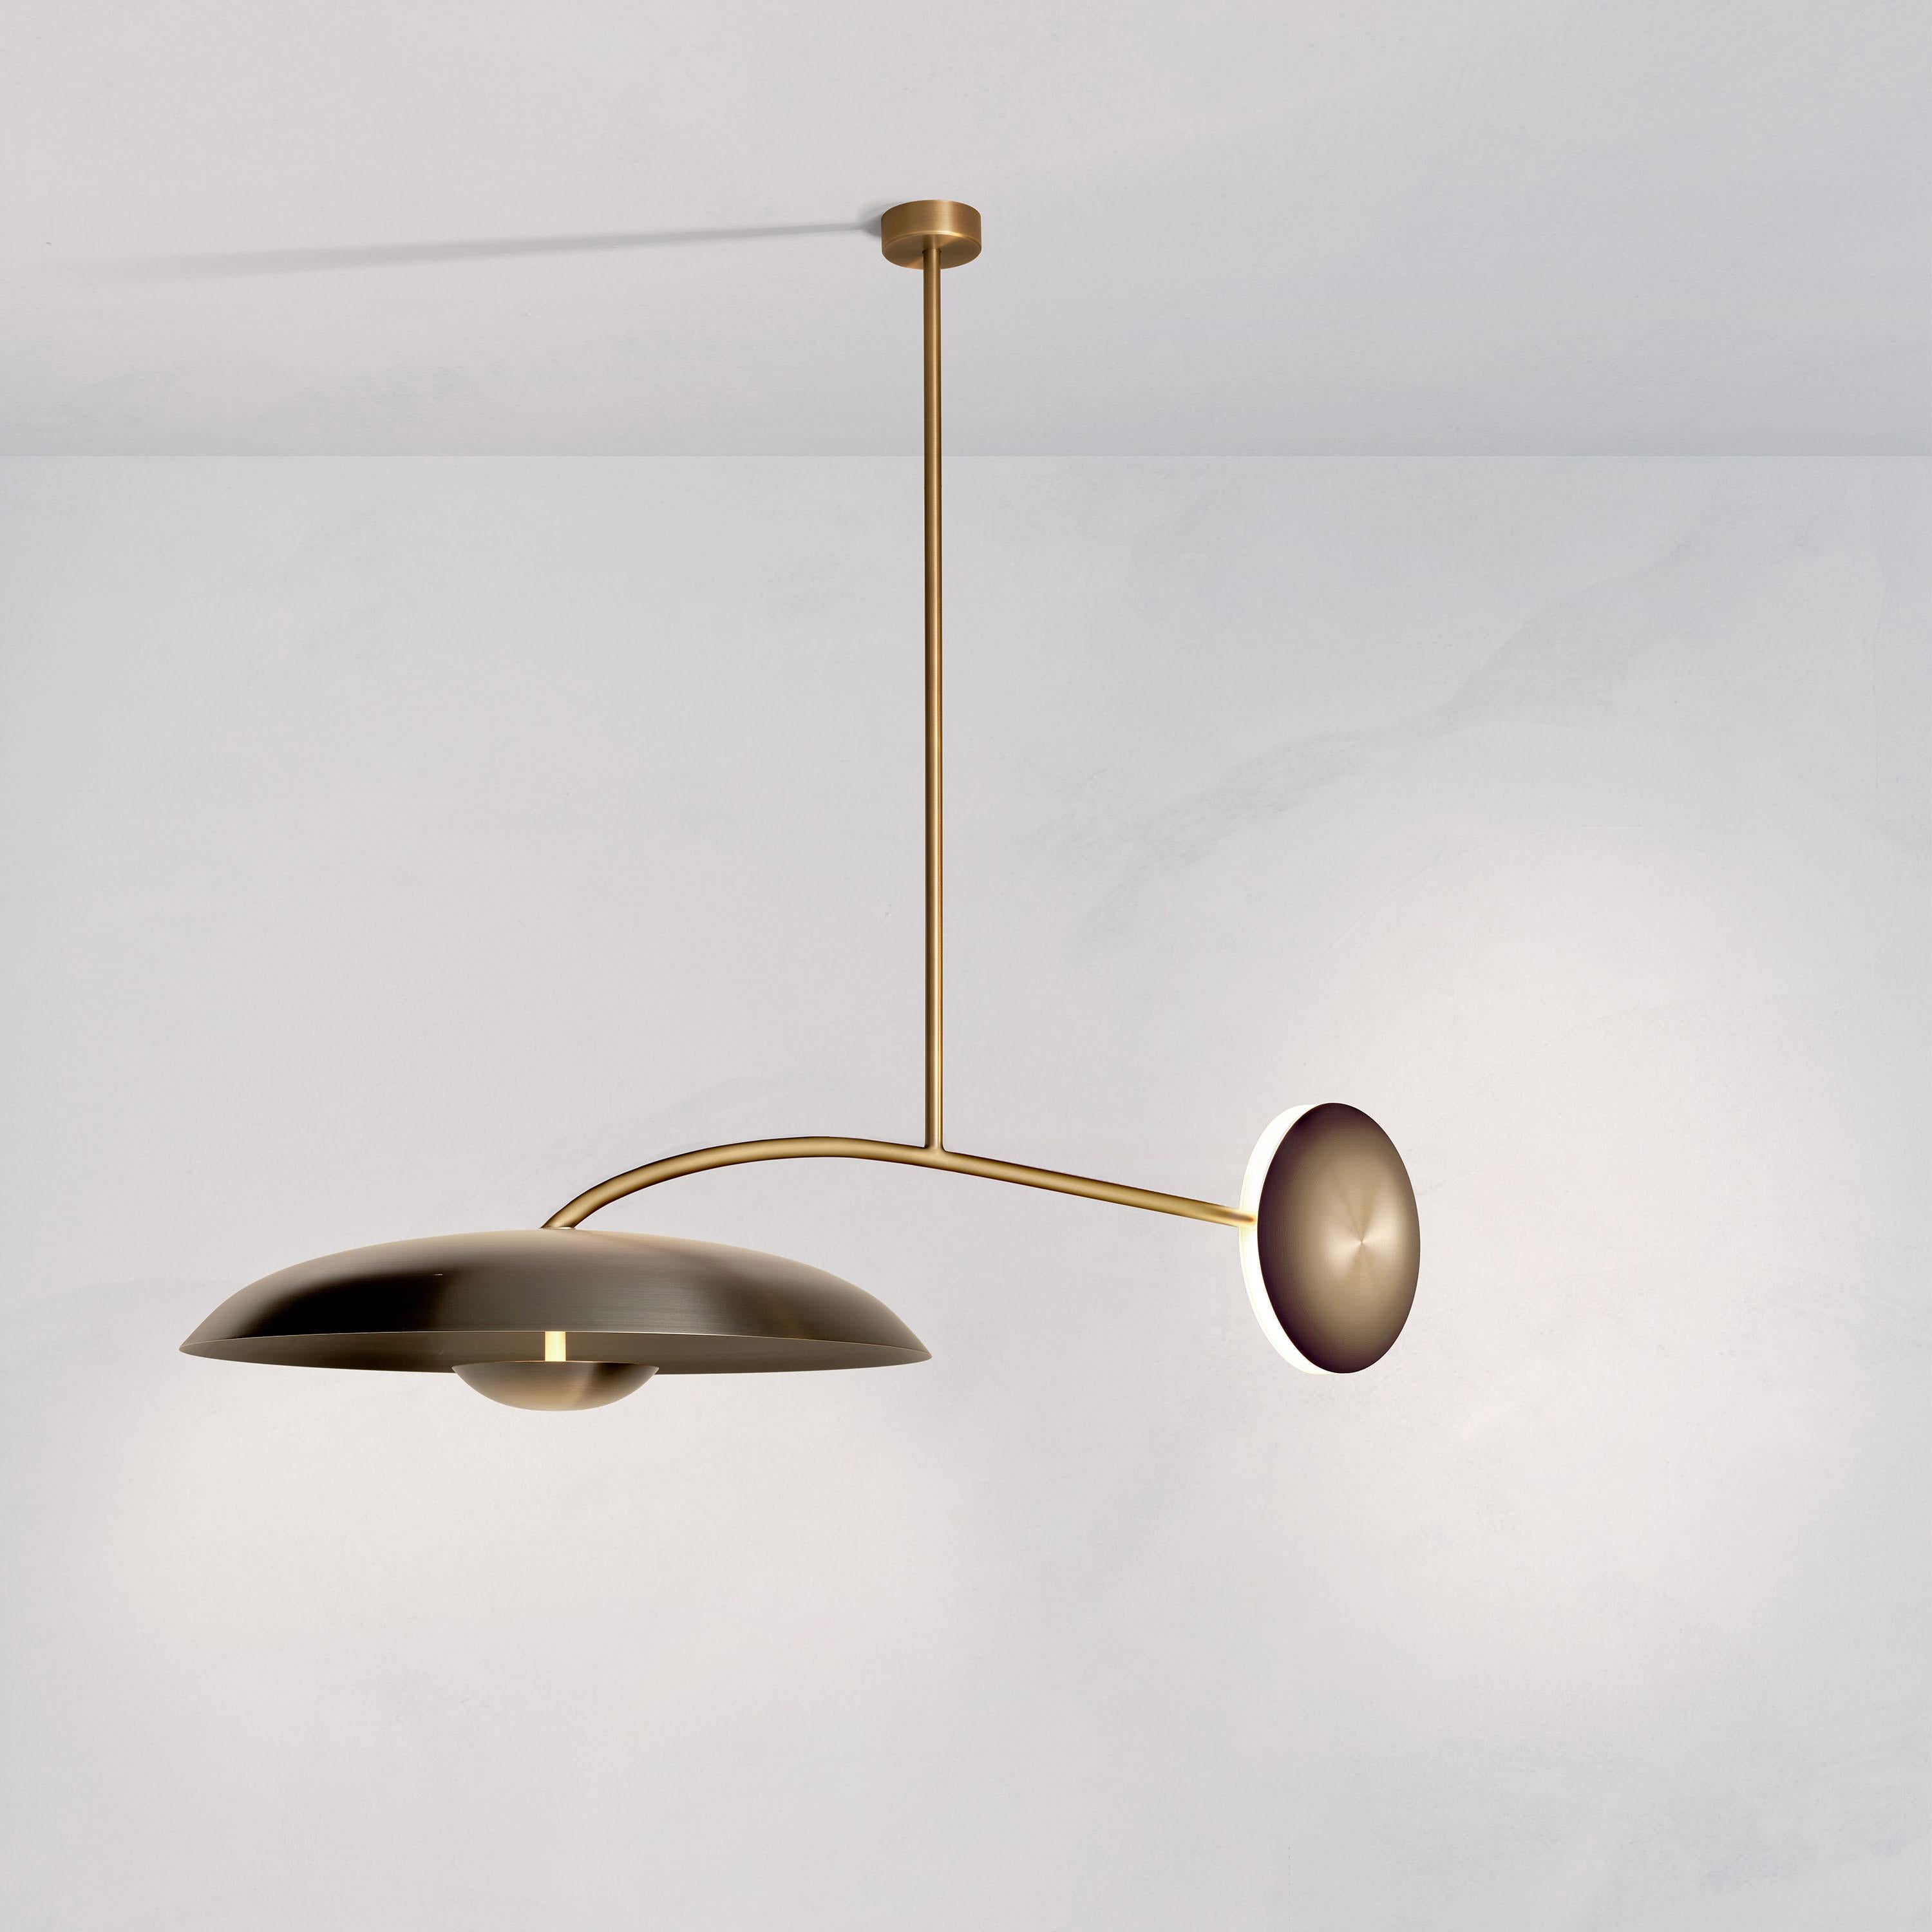 English 'Cosmic Orbit Solo Ore' Bronze Gradient Patinated Brass Ceiling Light Chandelier For Sale